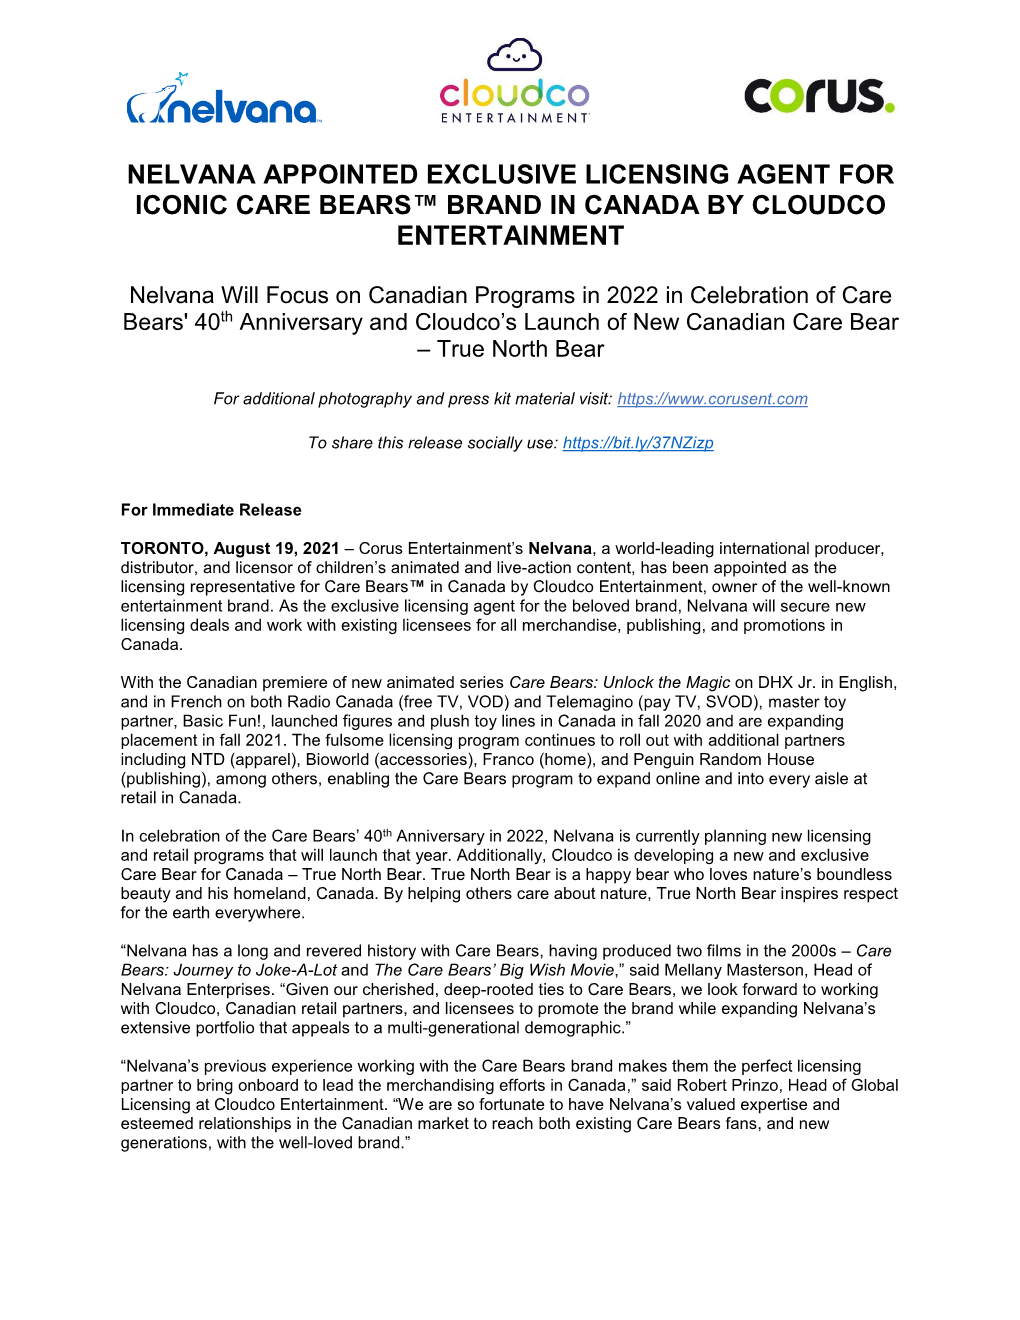 Nelvana Appointed Exclusive Licensing Agent for Iconic Care Bears Brand